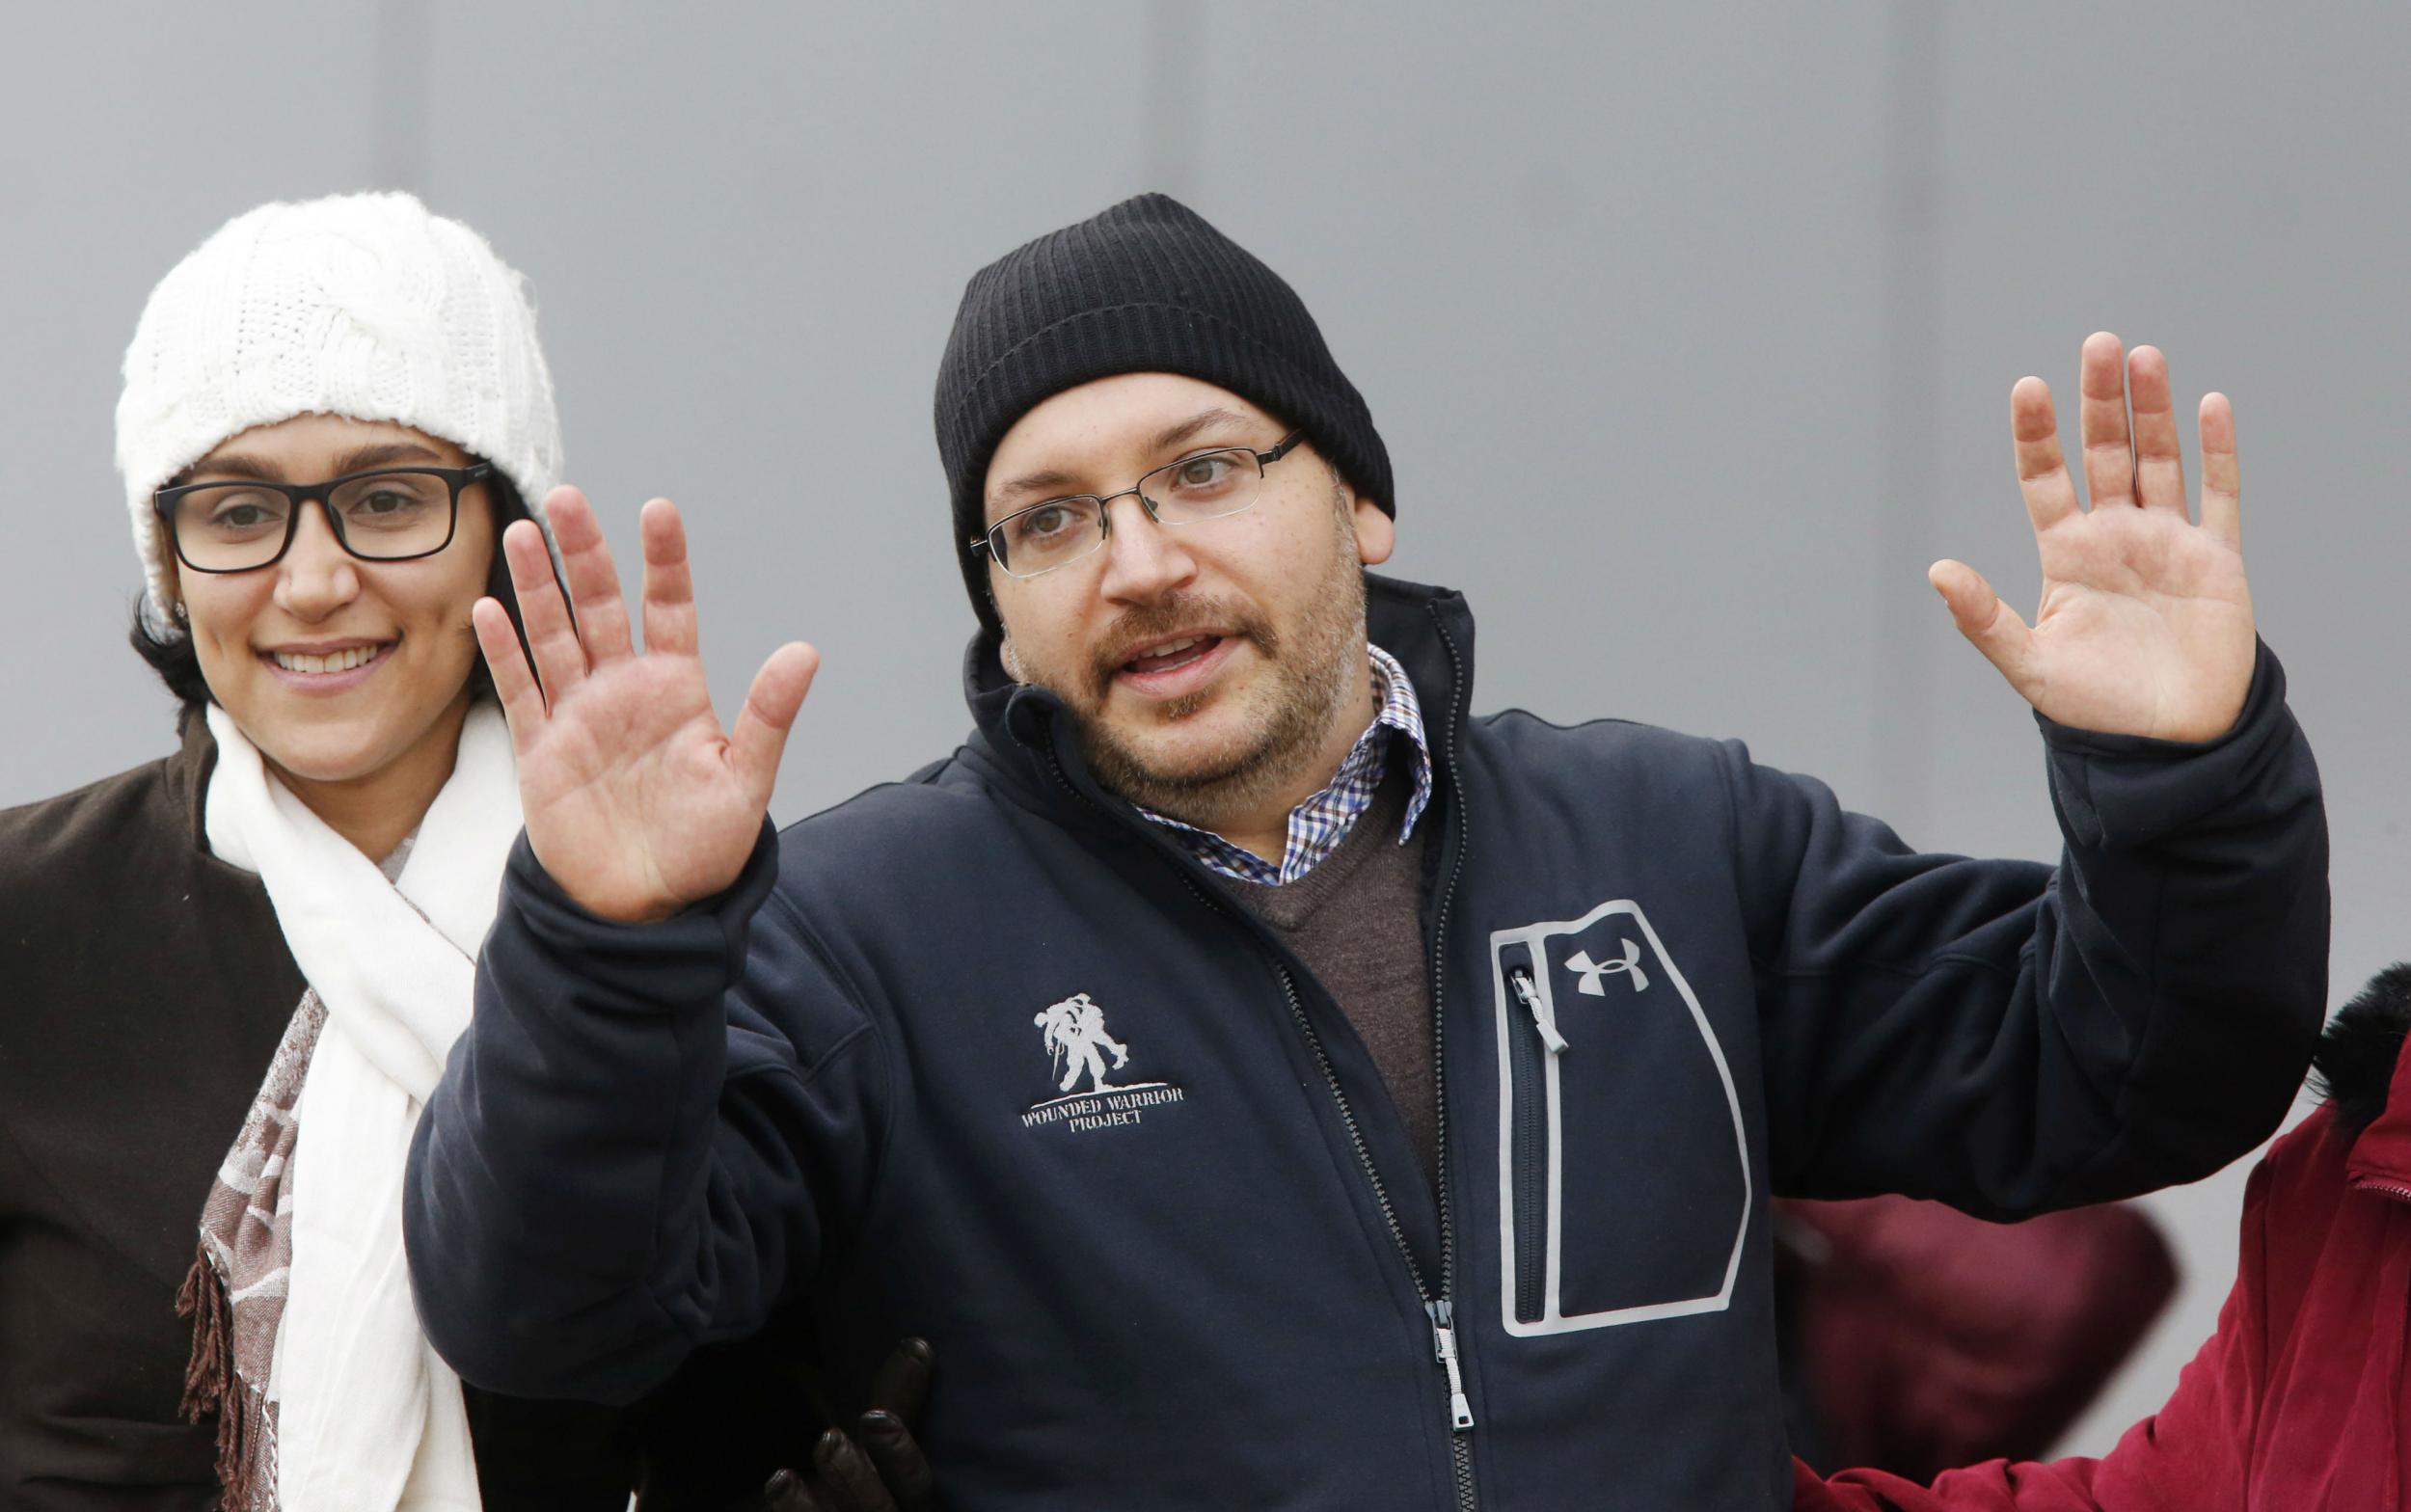 Jason Rezaian and his wife Yeganeh Salehi on Wednesday